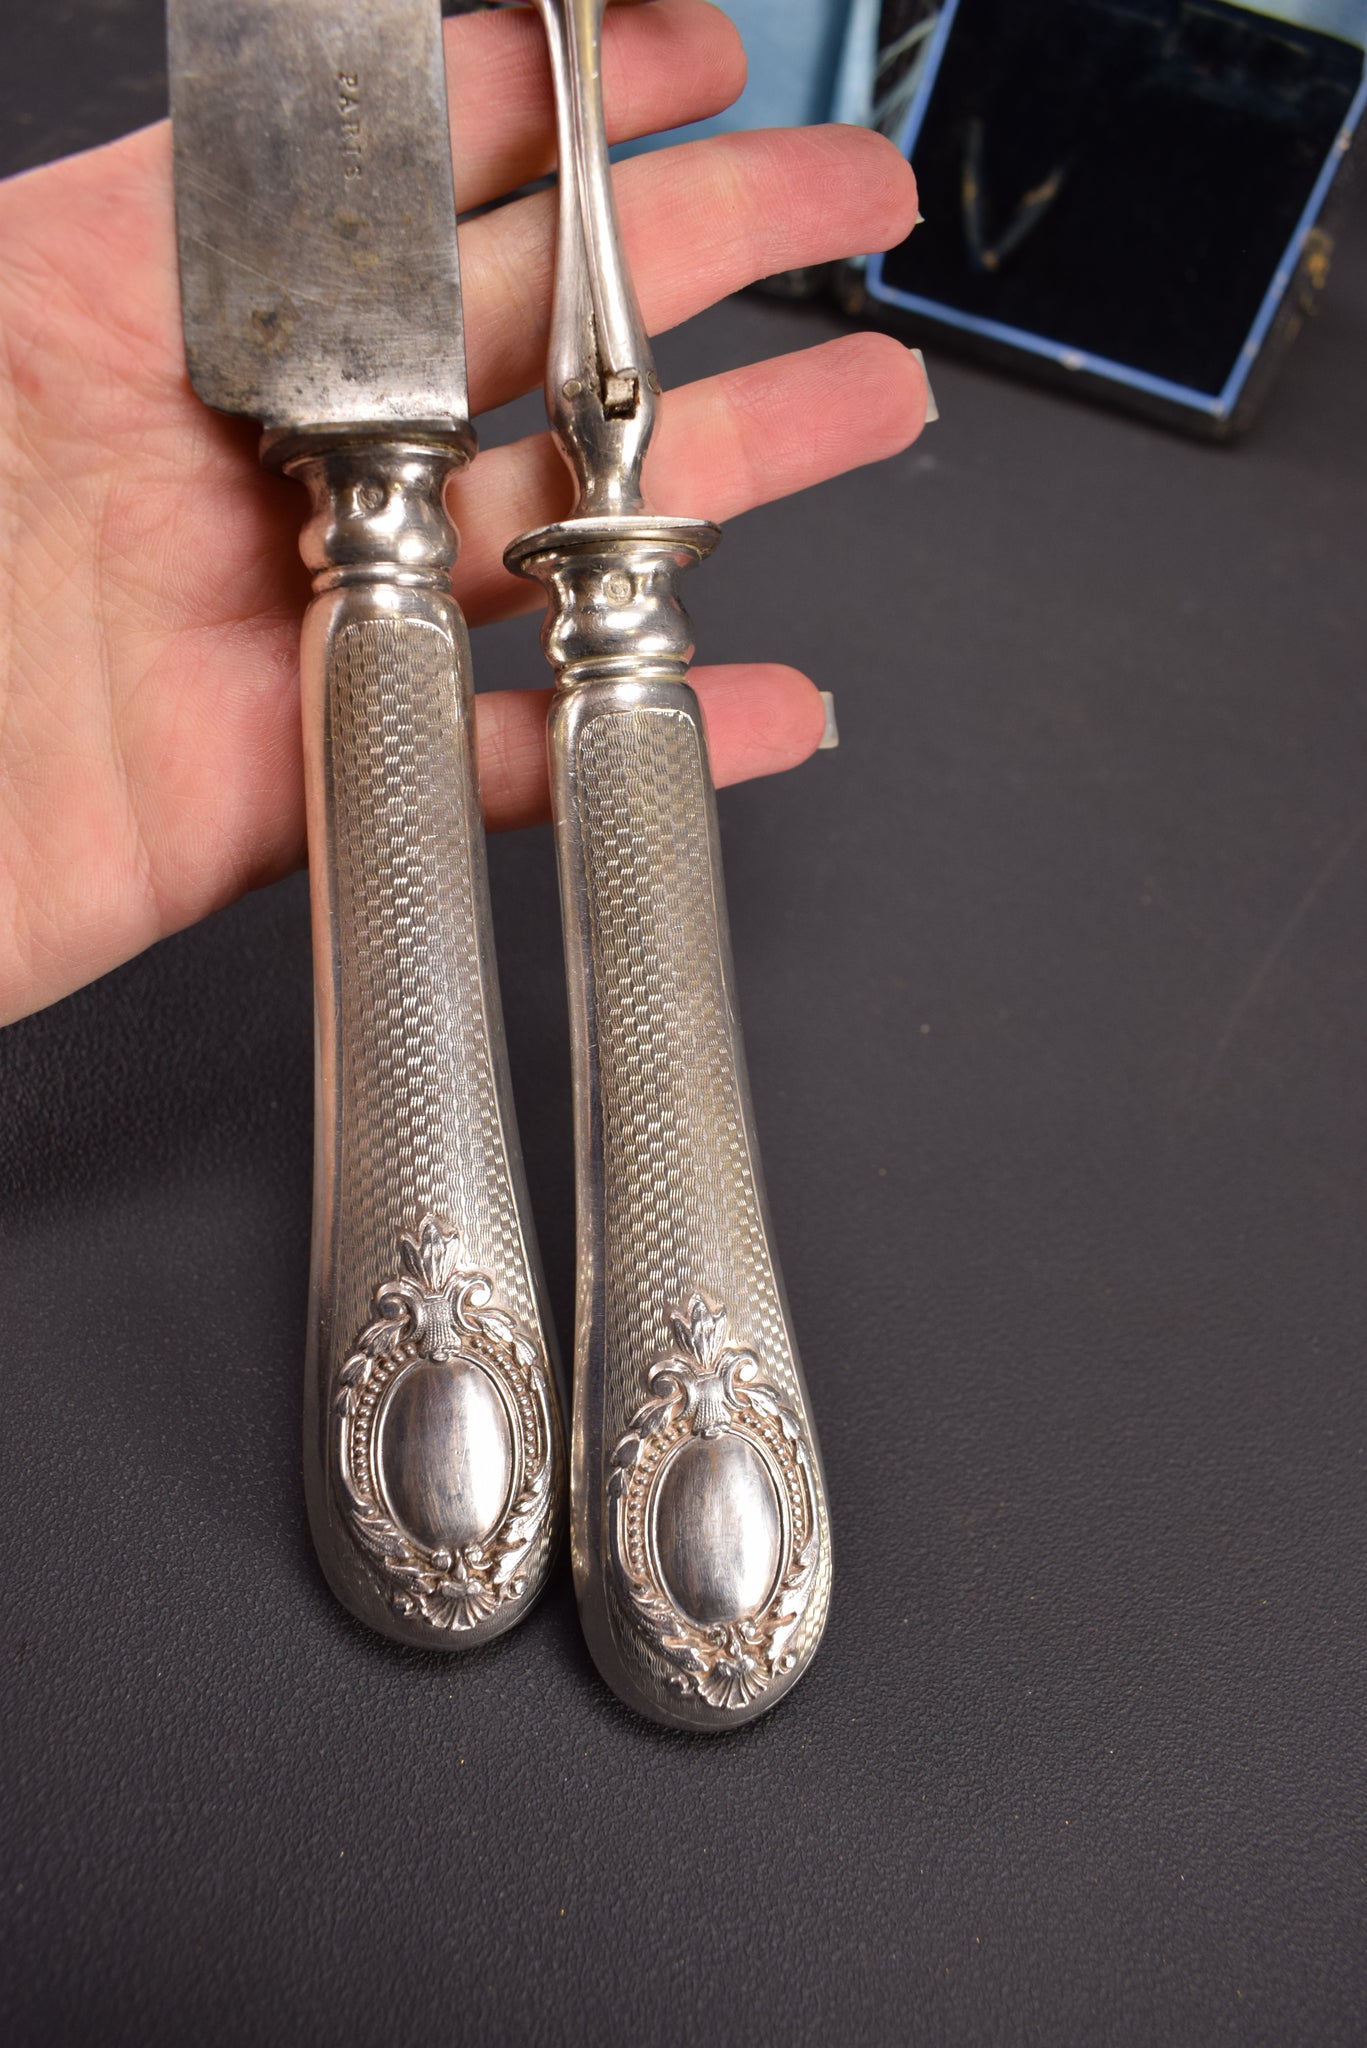 Guilloche silver Carving Set